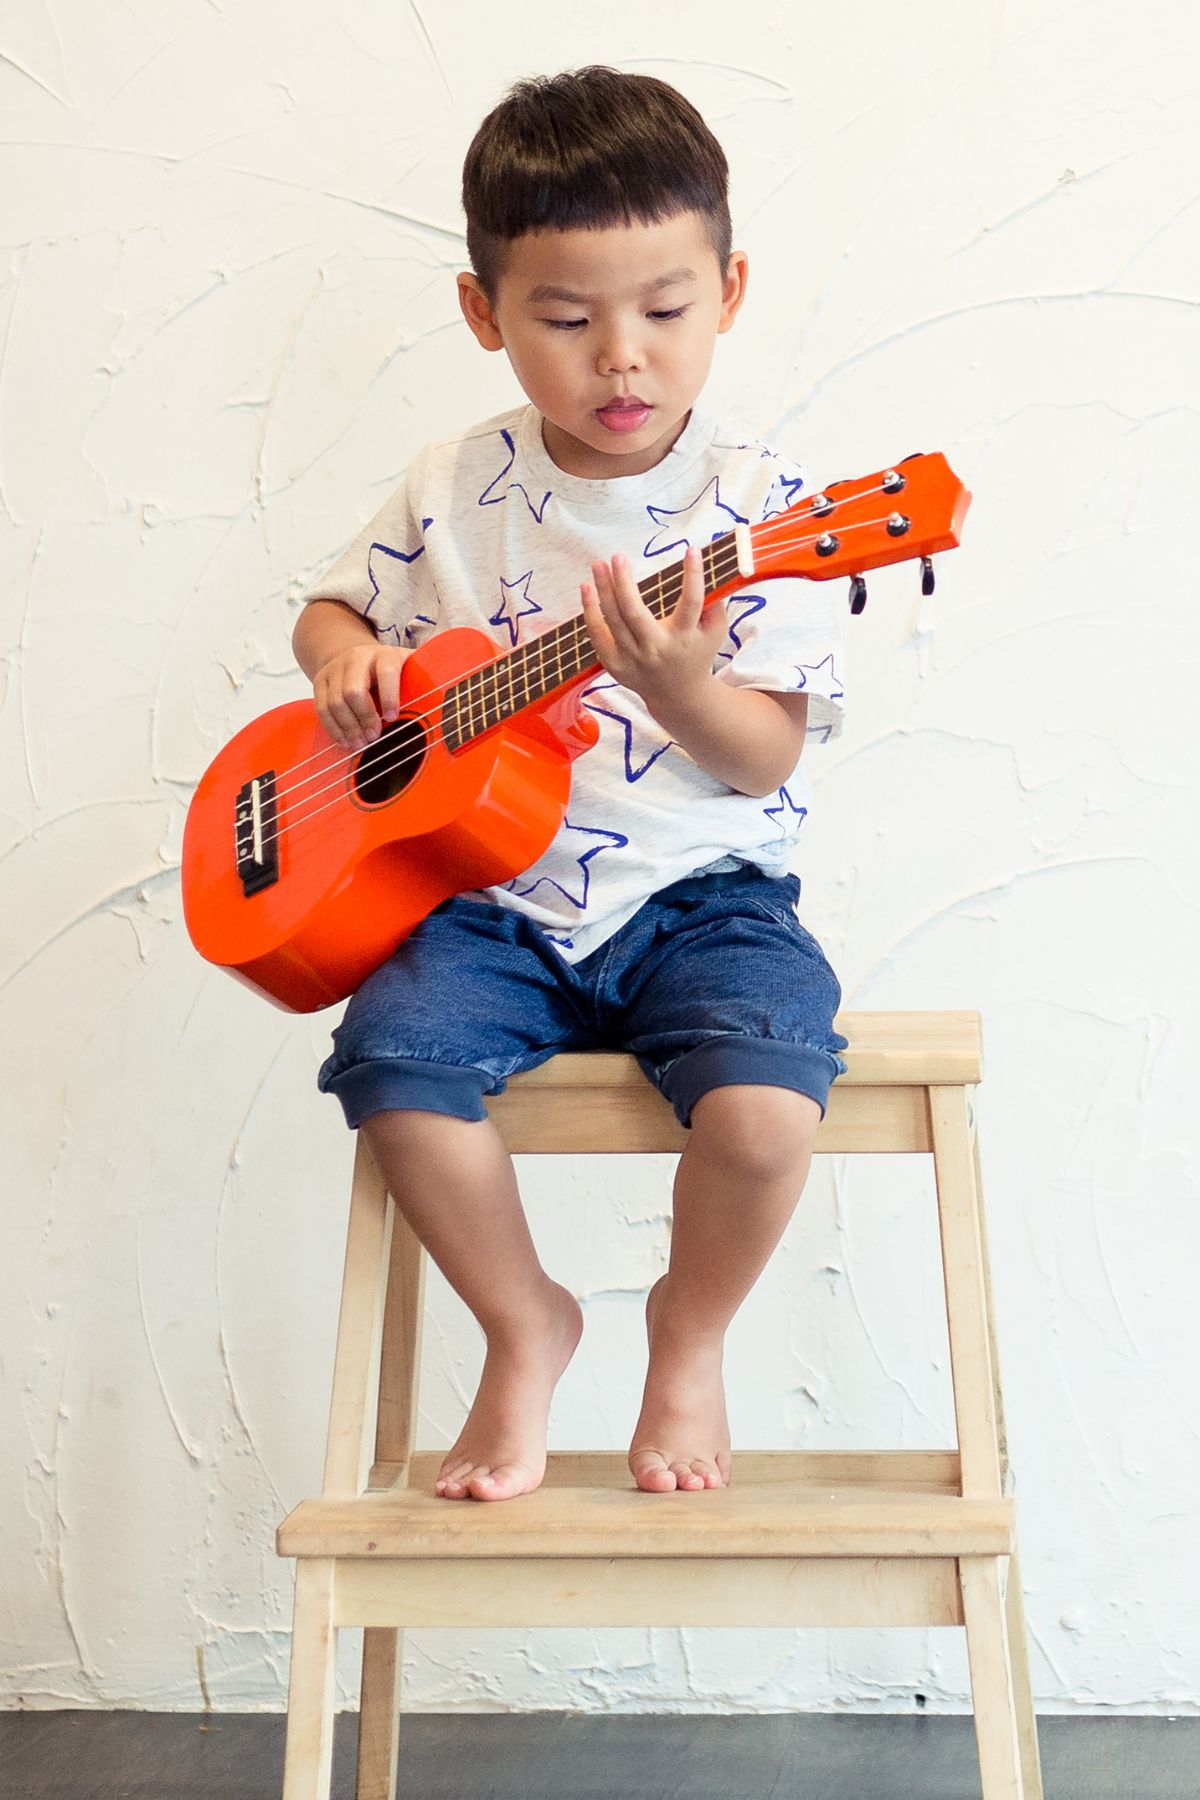 A toddler boy plays a red guitar while sitting on a wooden stool.